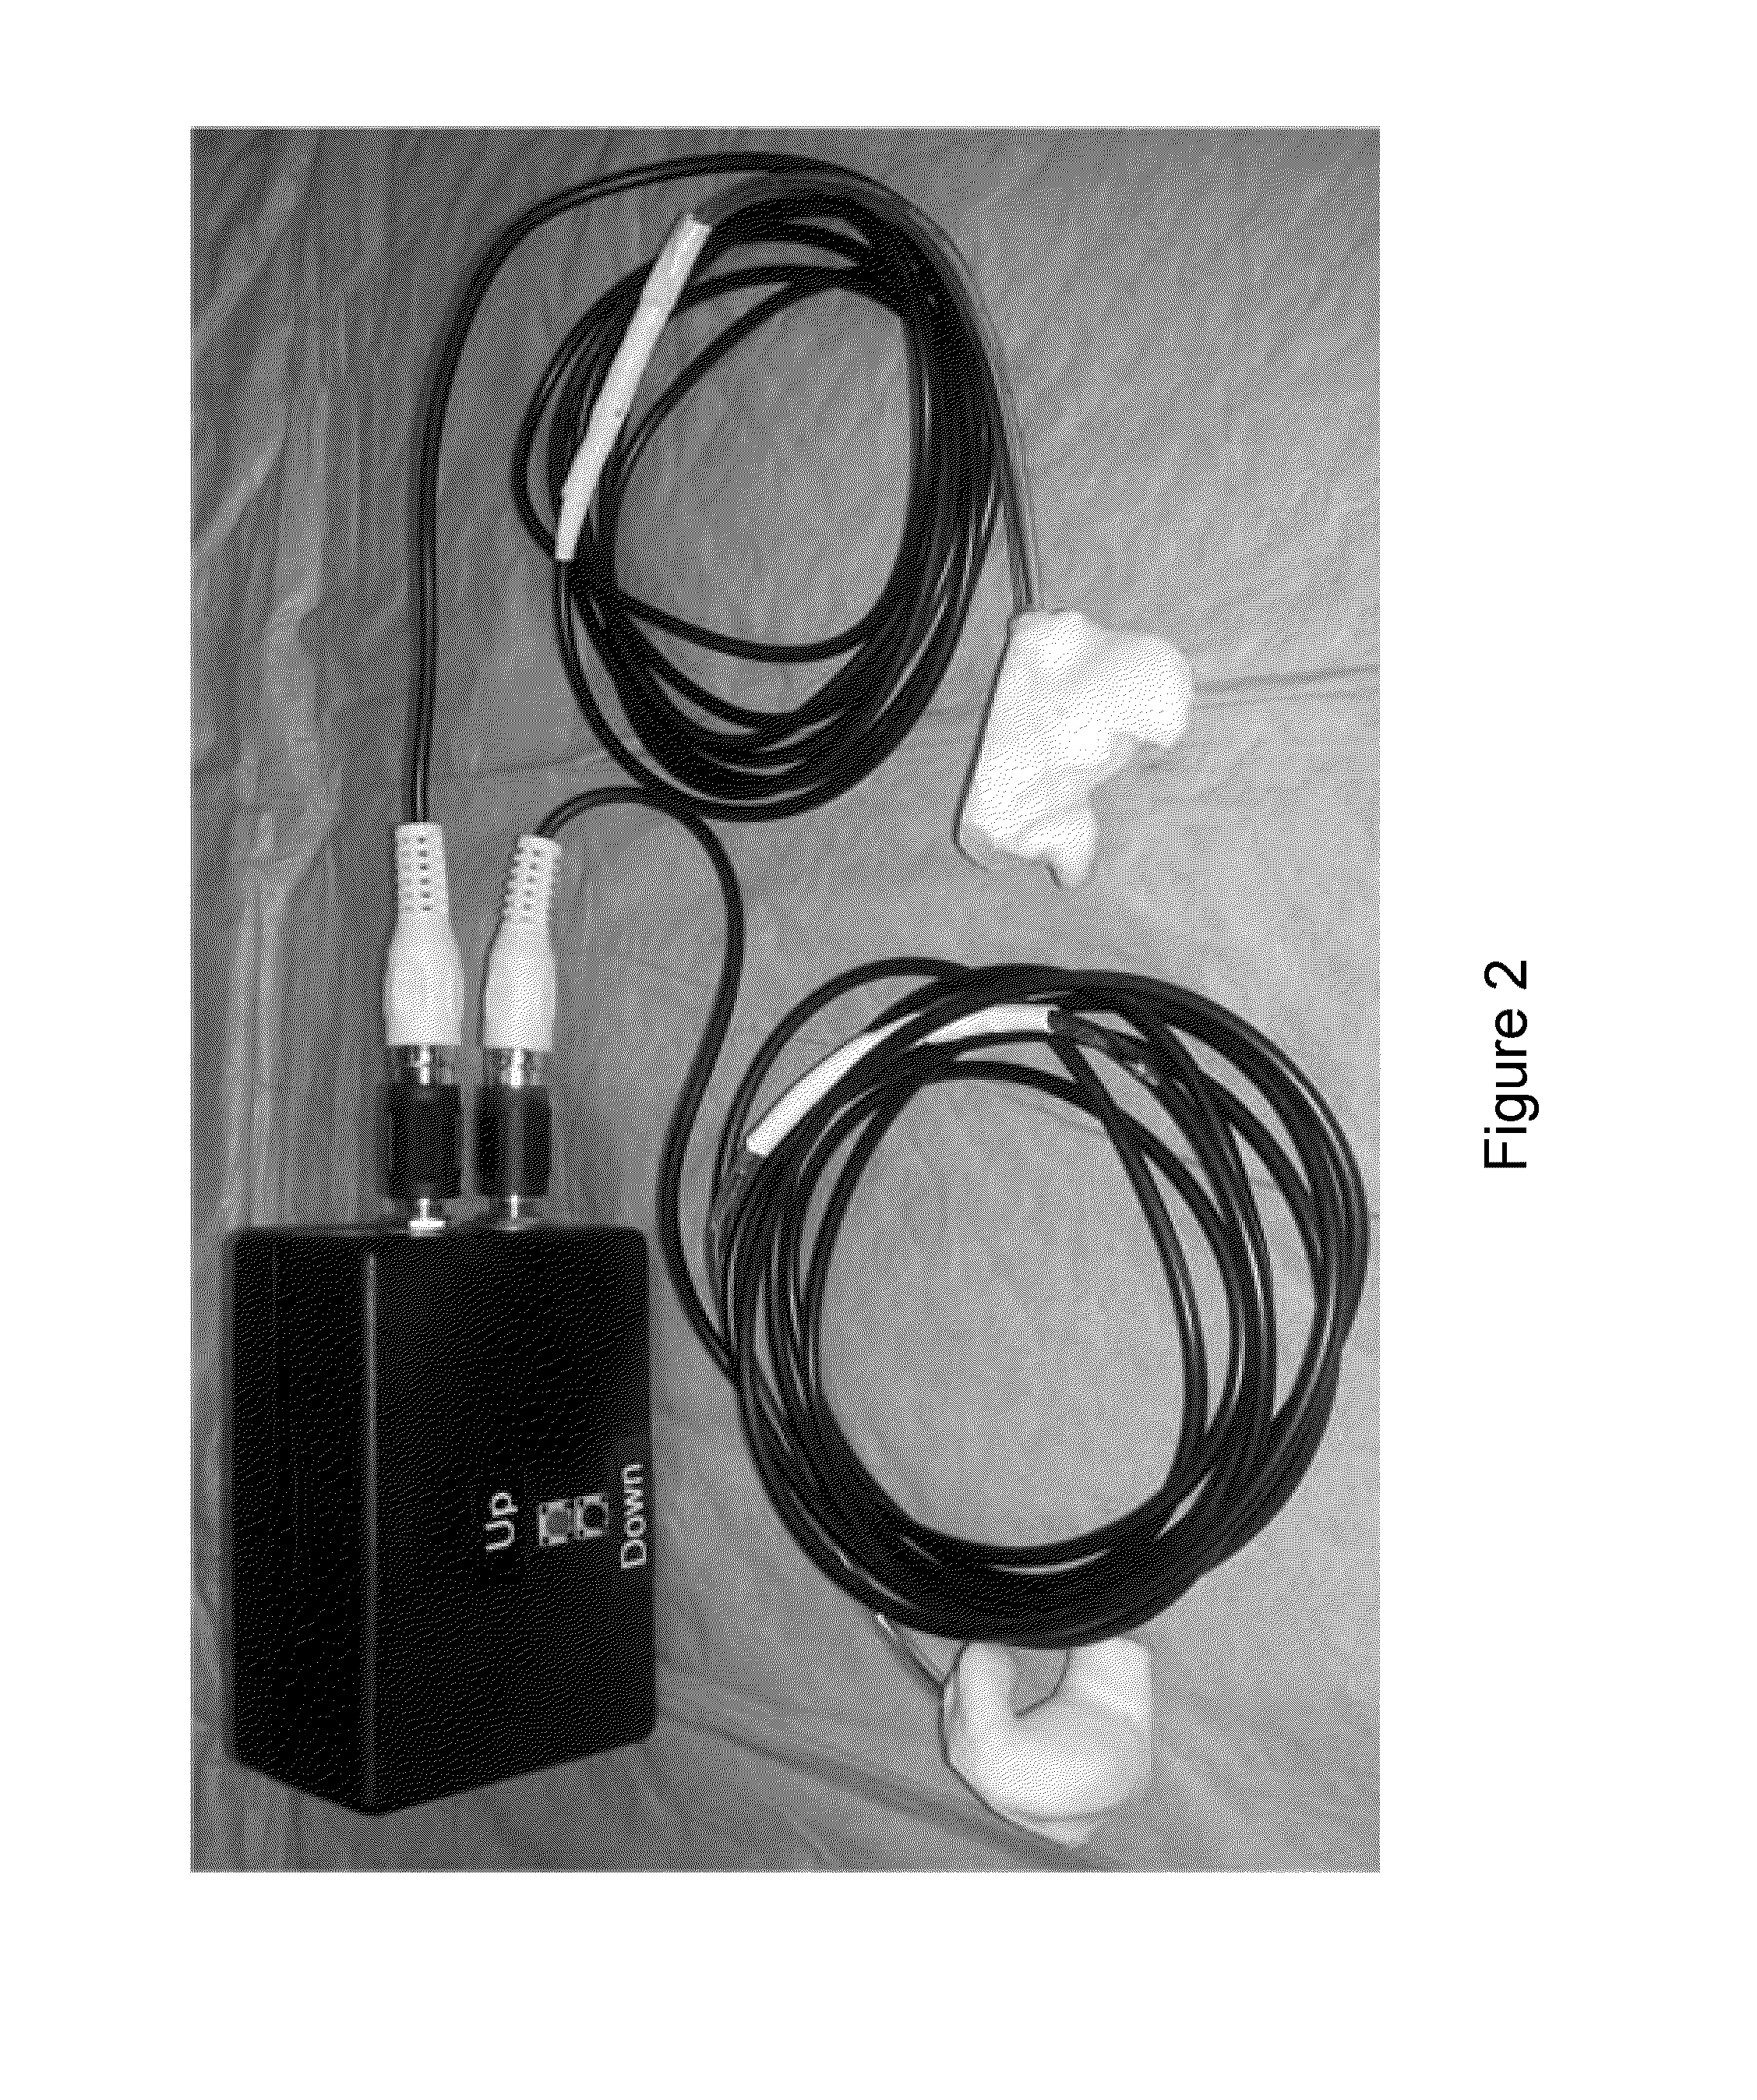 Device, System and Method for Reducing Headache Pain